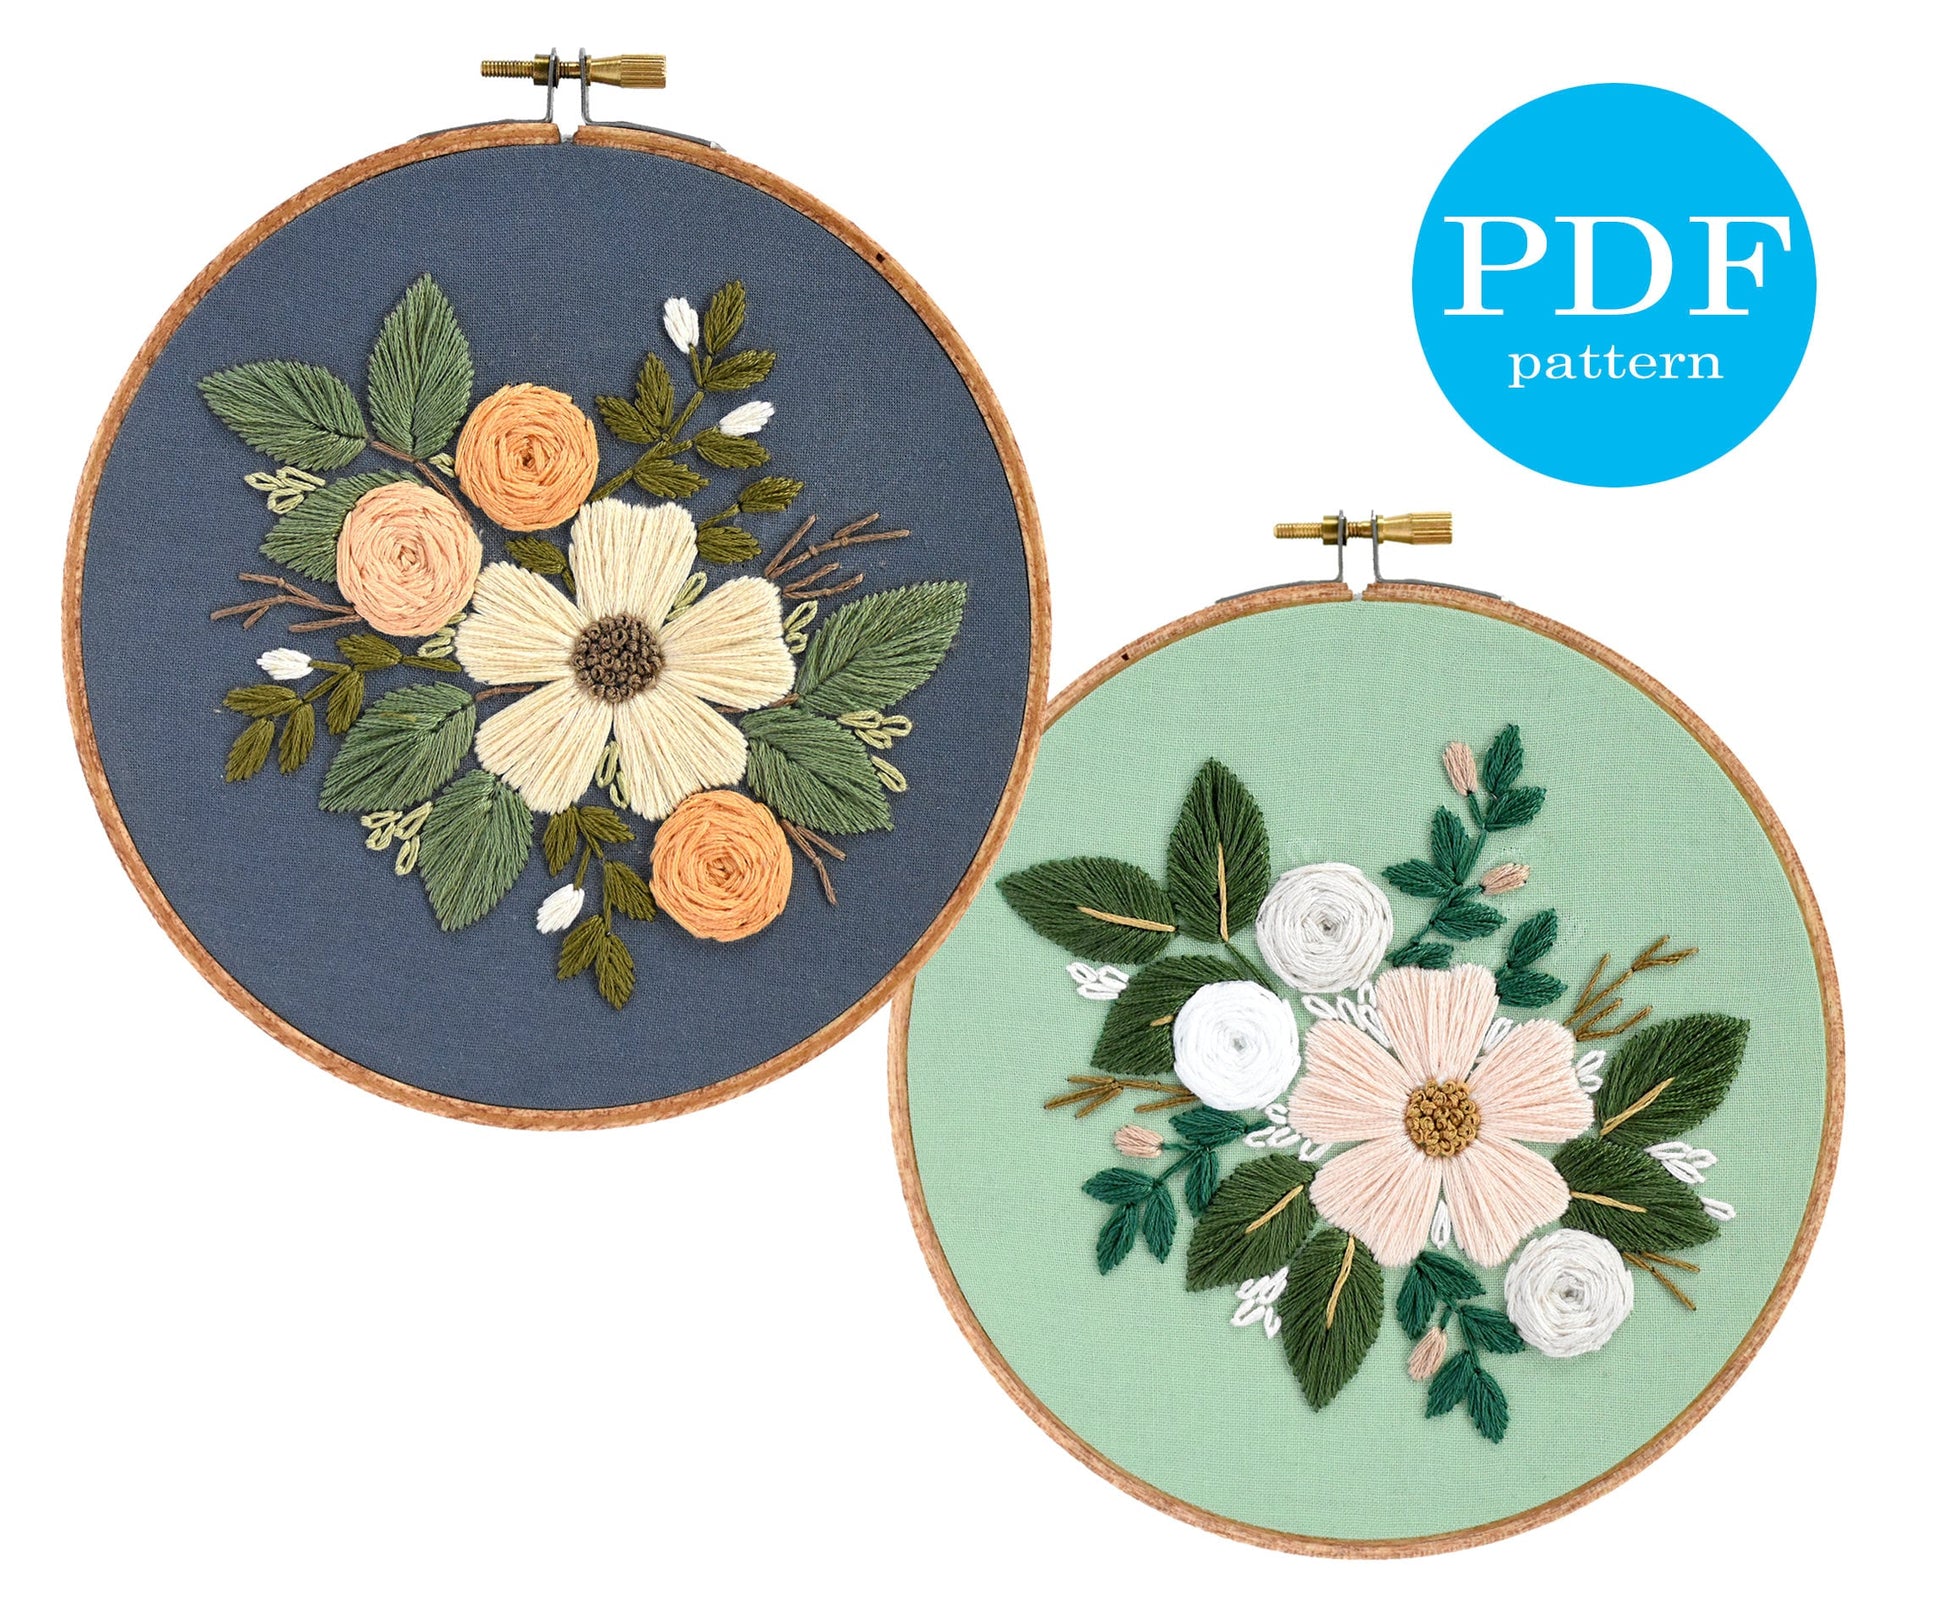 Neutral Floral Embroidery Pattern. Beginner Embroidery. PDF embroidery pattern. Needlework pattern. DIY embroidery. DIY craft. Spring flower